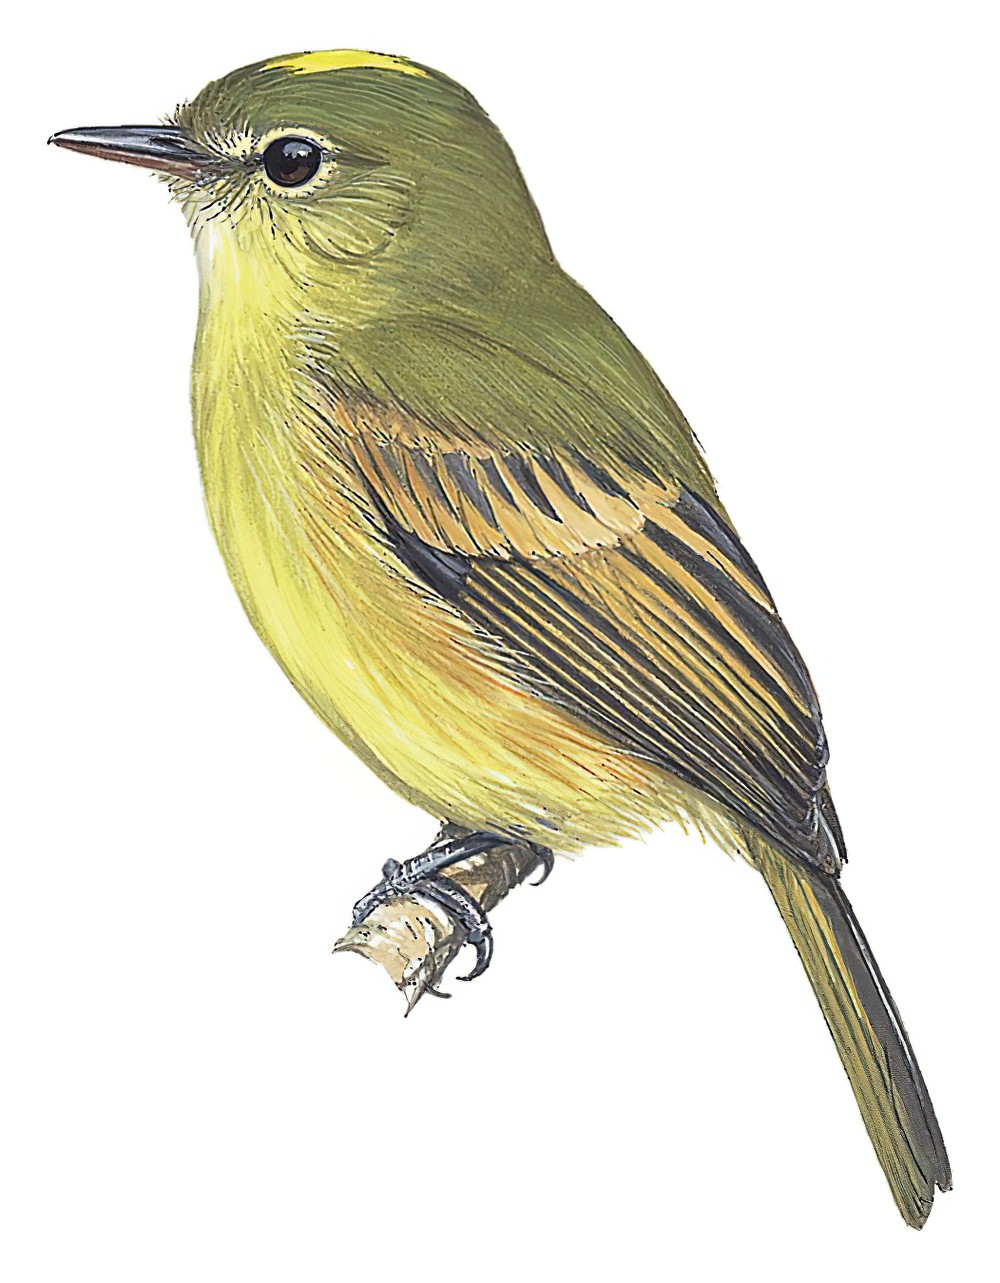 Flavescent Flycatcher / Myiophobus flavicans